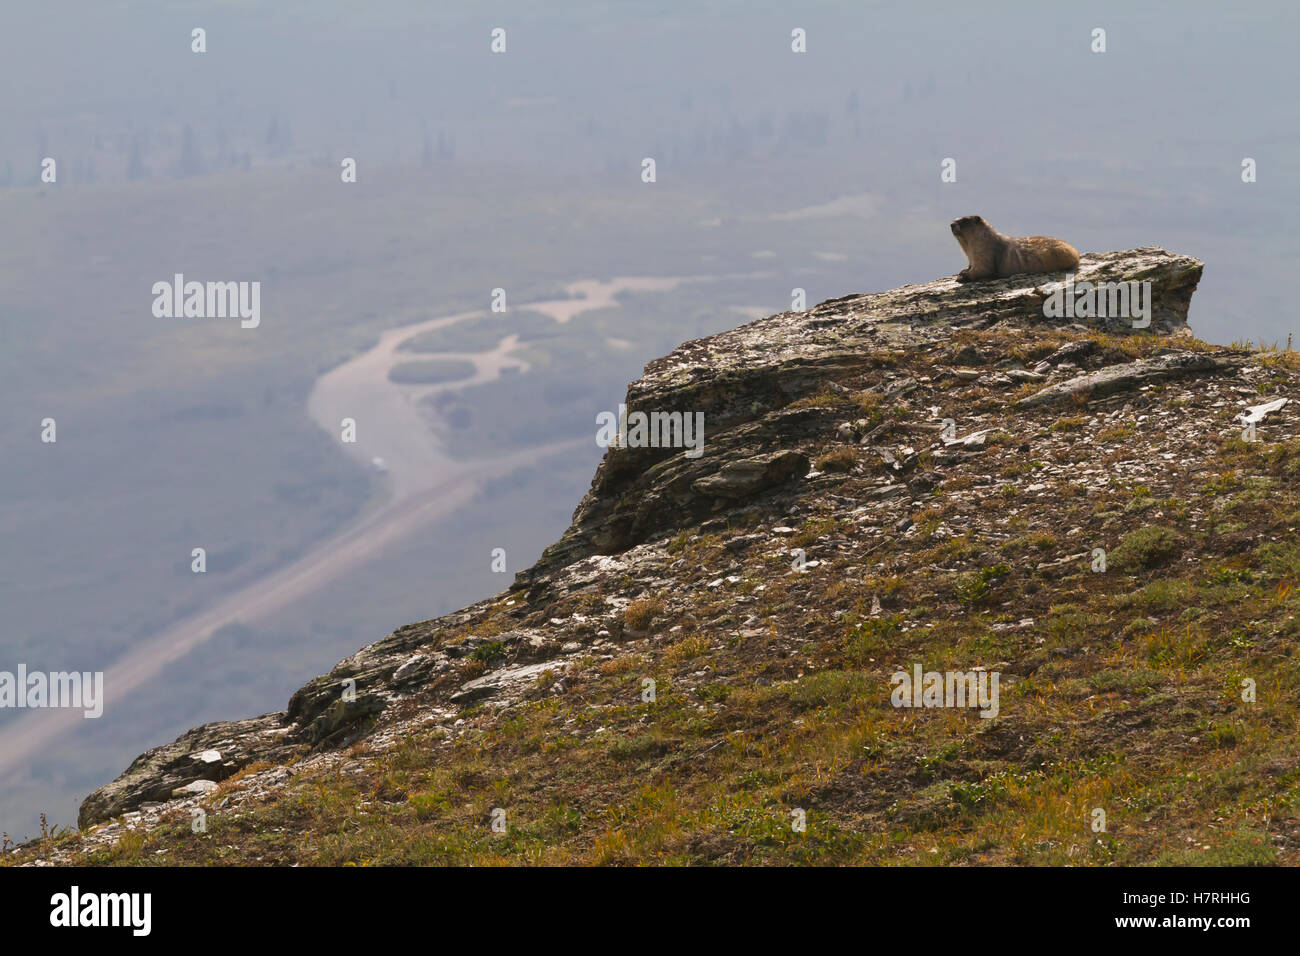 An adult Hoary marmot (Marmota caligata) suns itself on a rock in the high country of Denali National Park and Preserve, interior Alaska in summertime Stock Photo